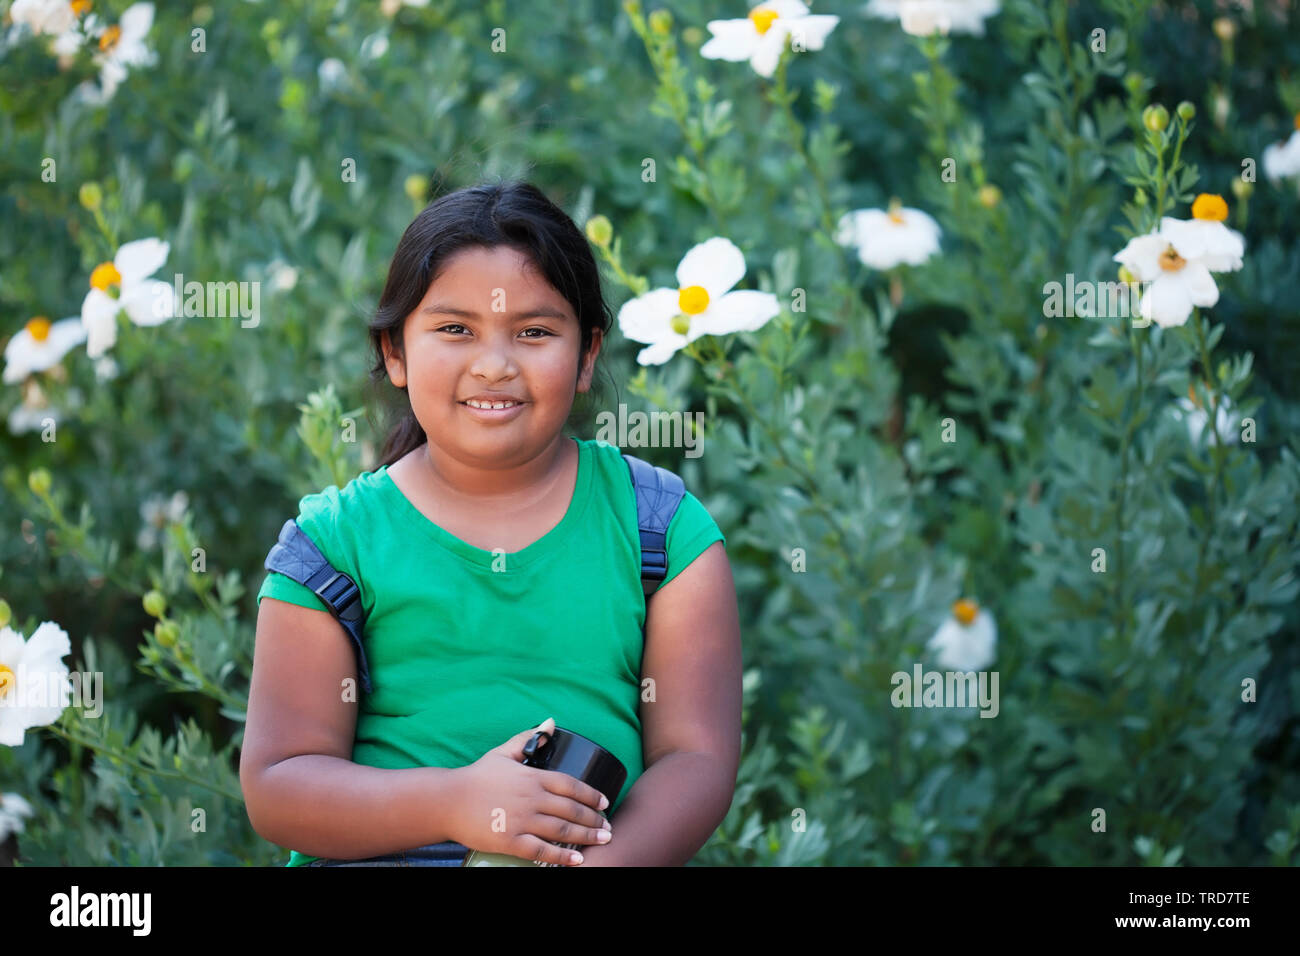 A 9 year old child or student wearing a backpack and holding a thermos standing in front of blooming flowers during a school field trip. Stock Photo